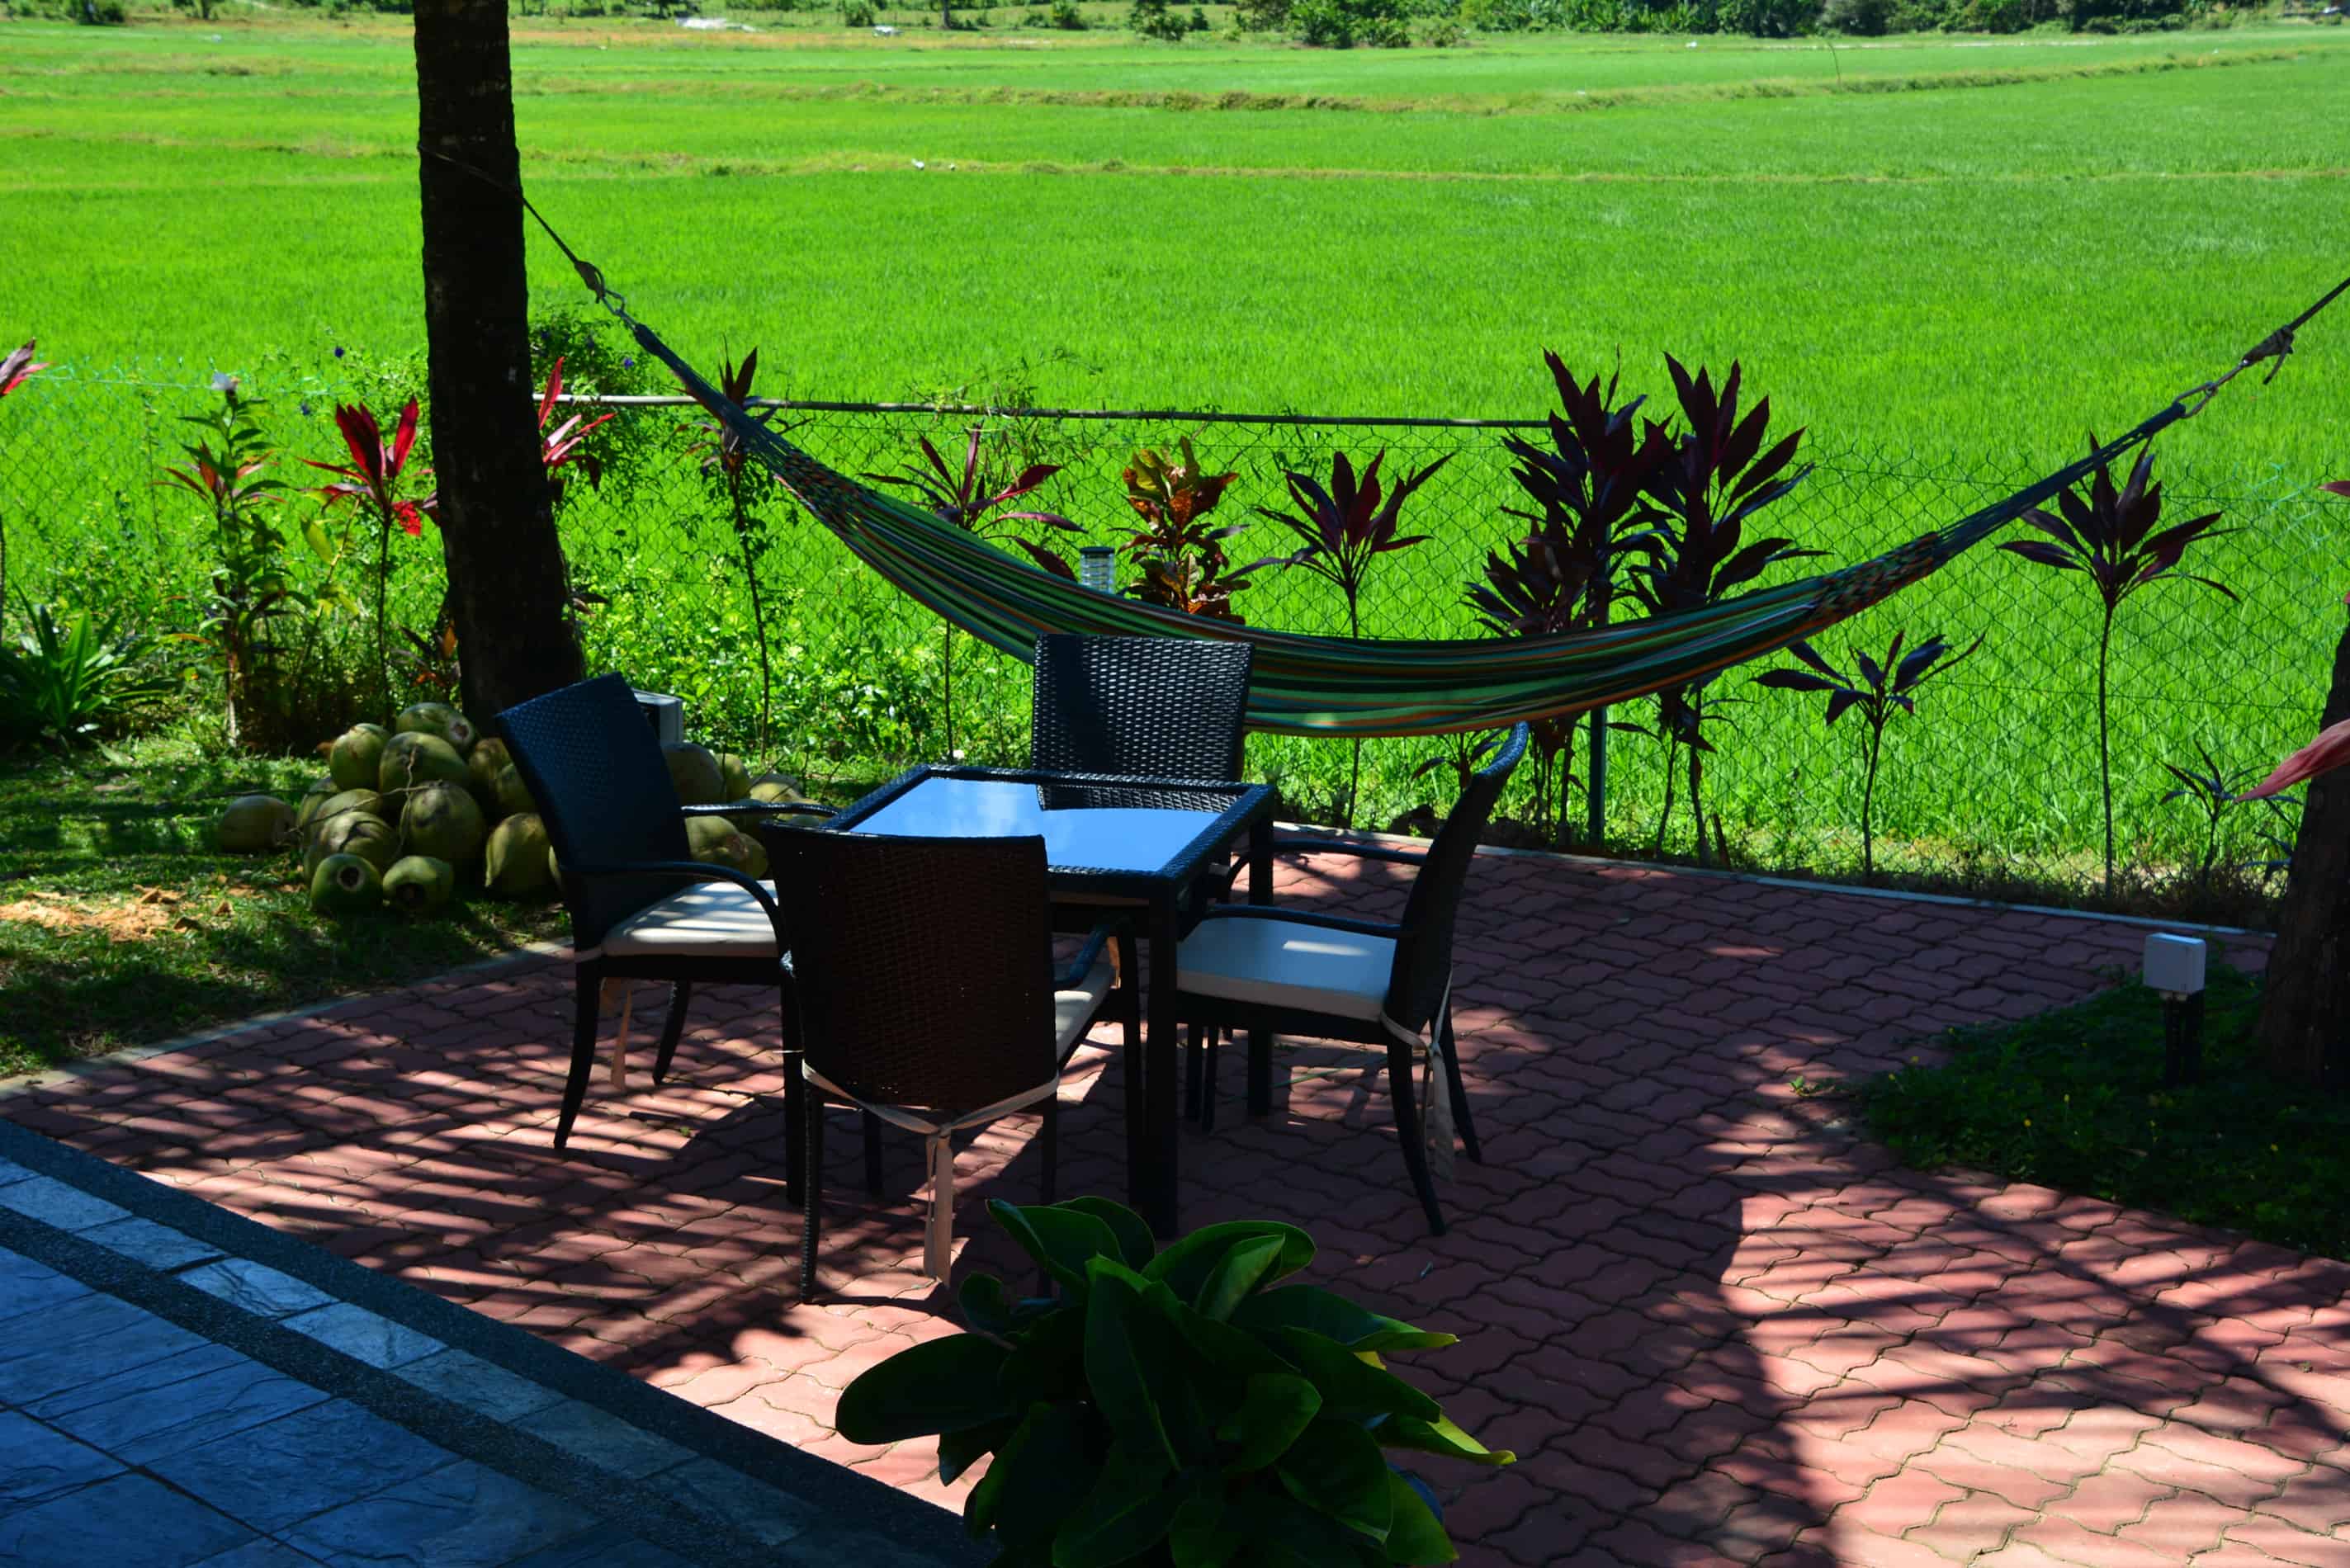 Sunset Valley - Dining area new pool and rice paddies